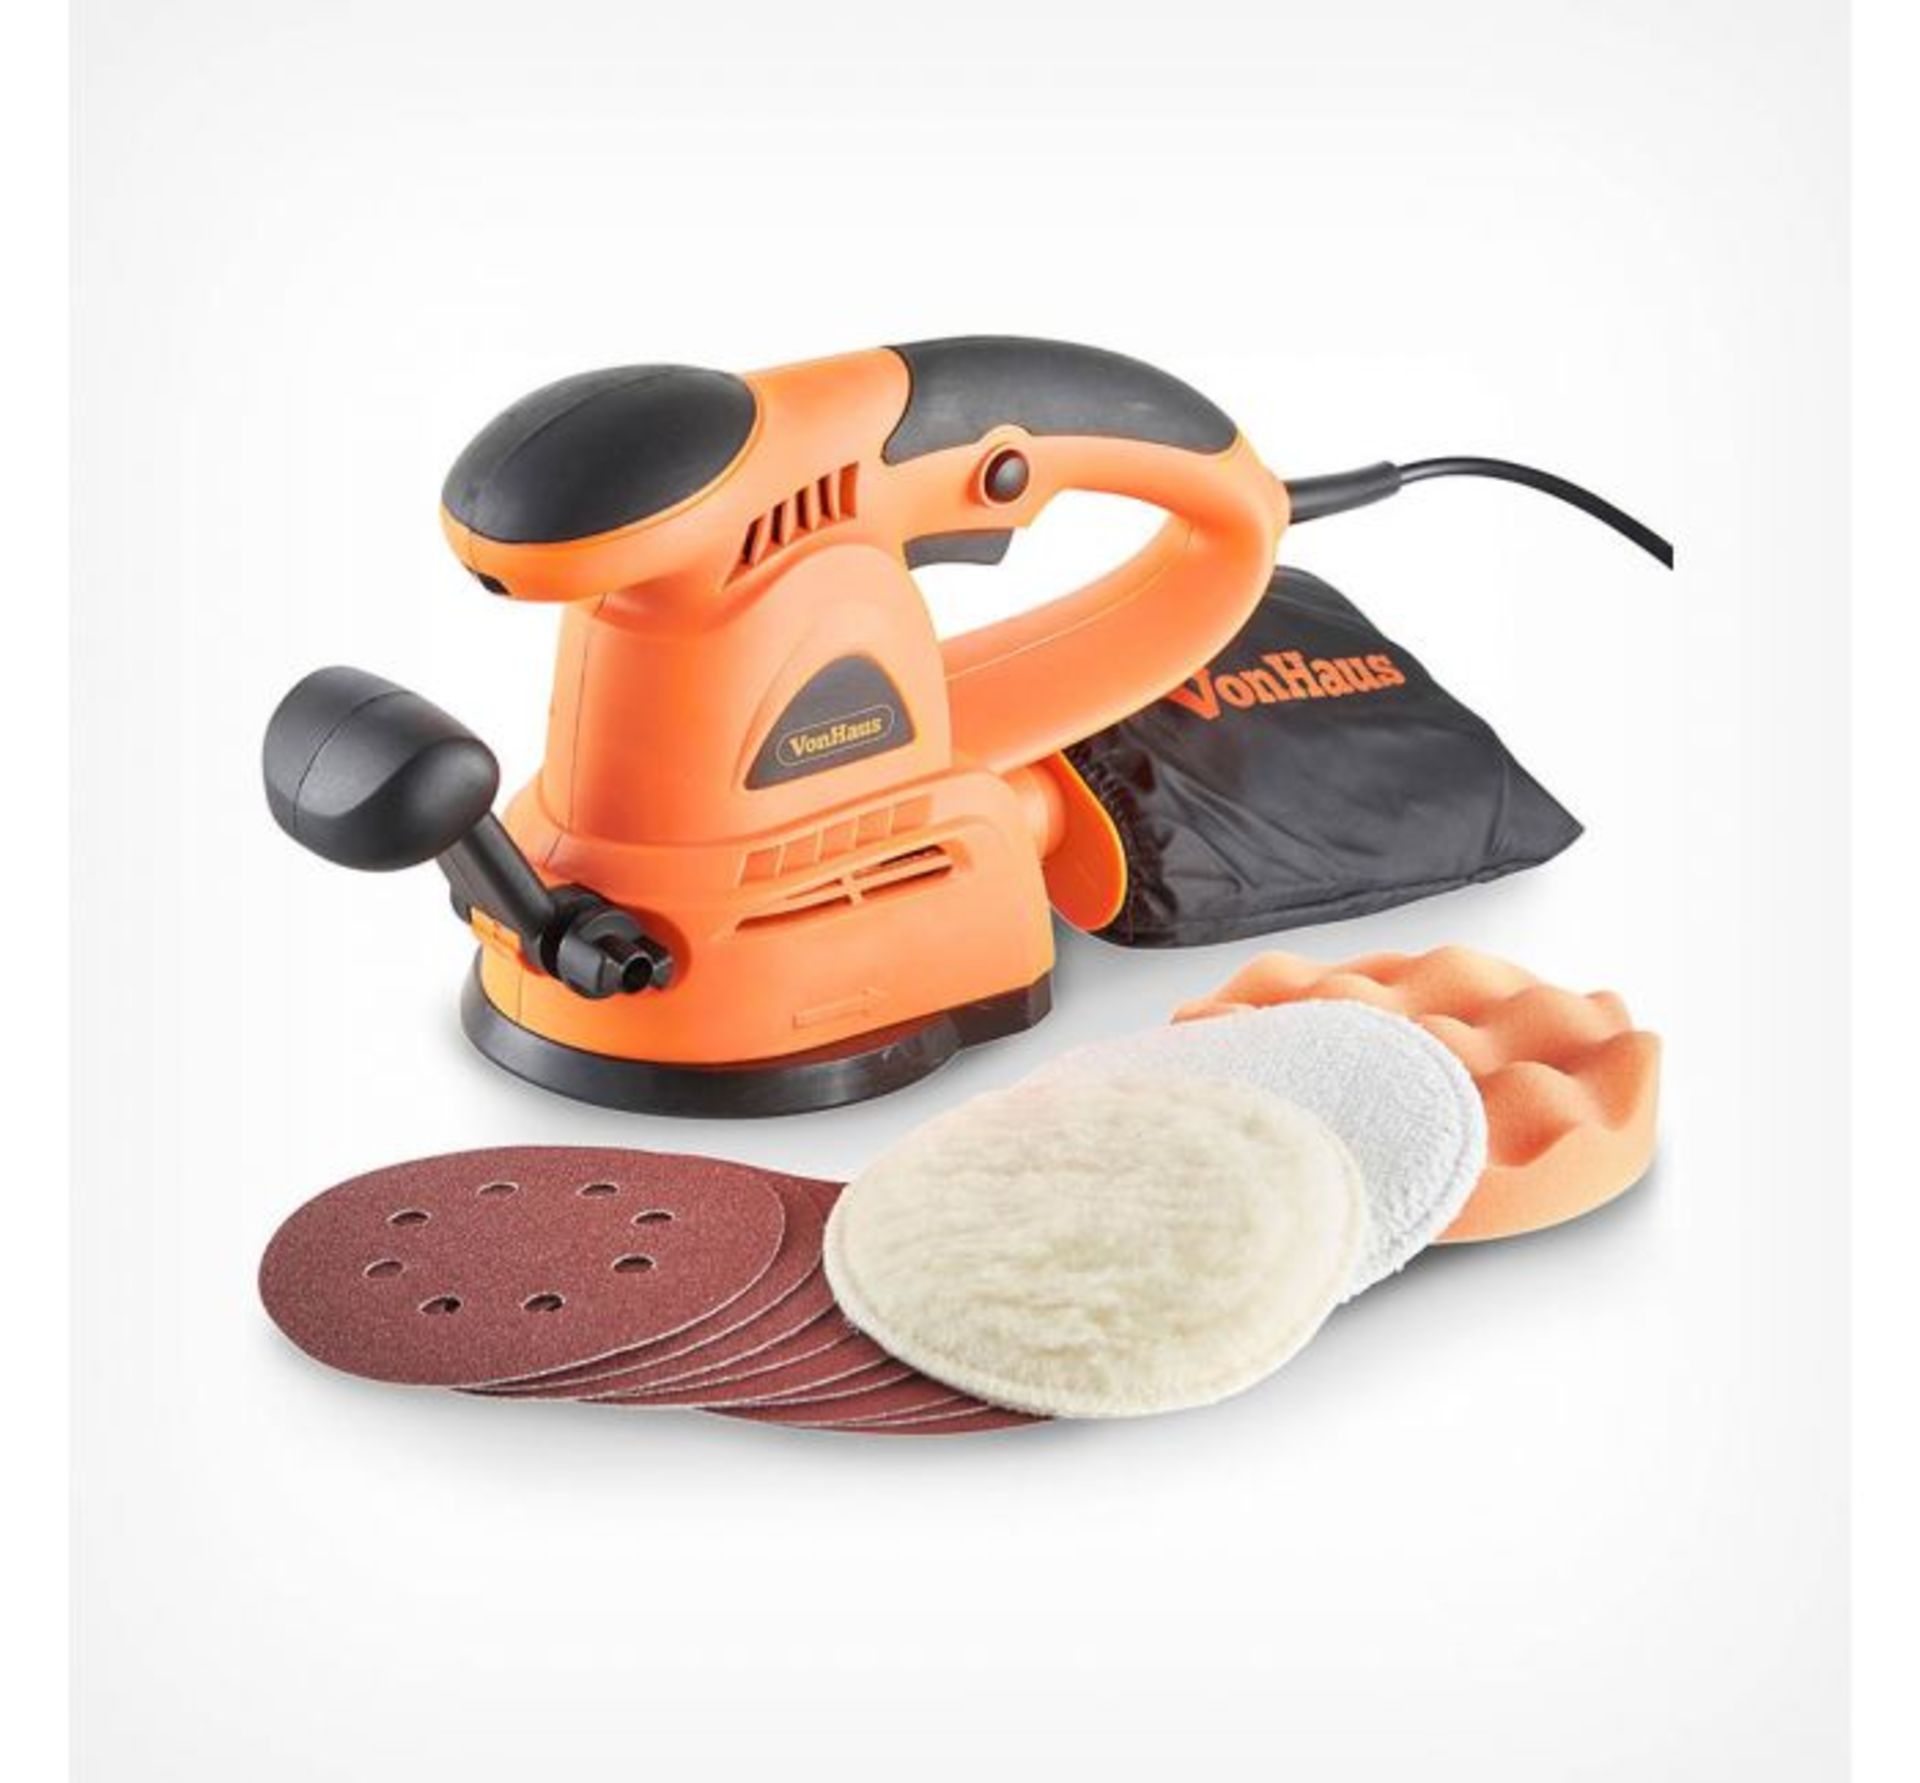 (DD10) Random Orbital Sander Powerful 430W motor with lock on switch and variable speed dial -...